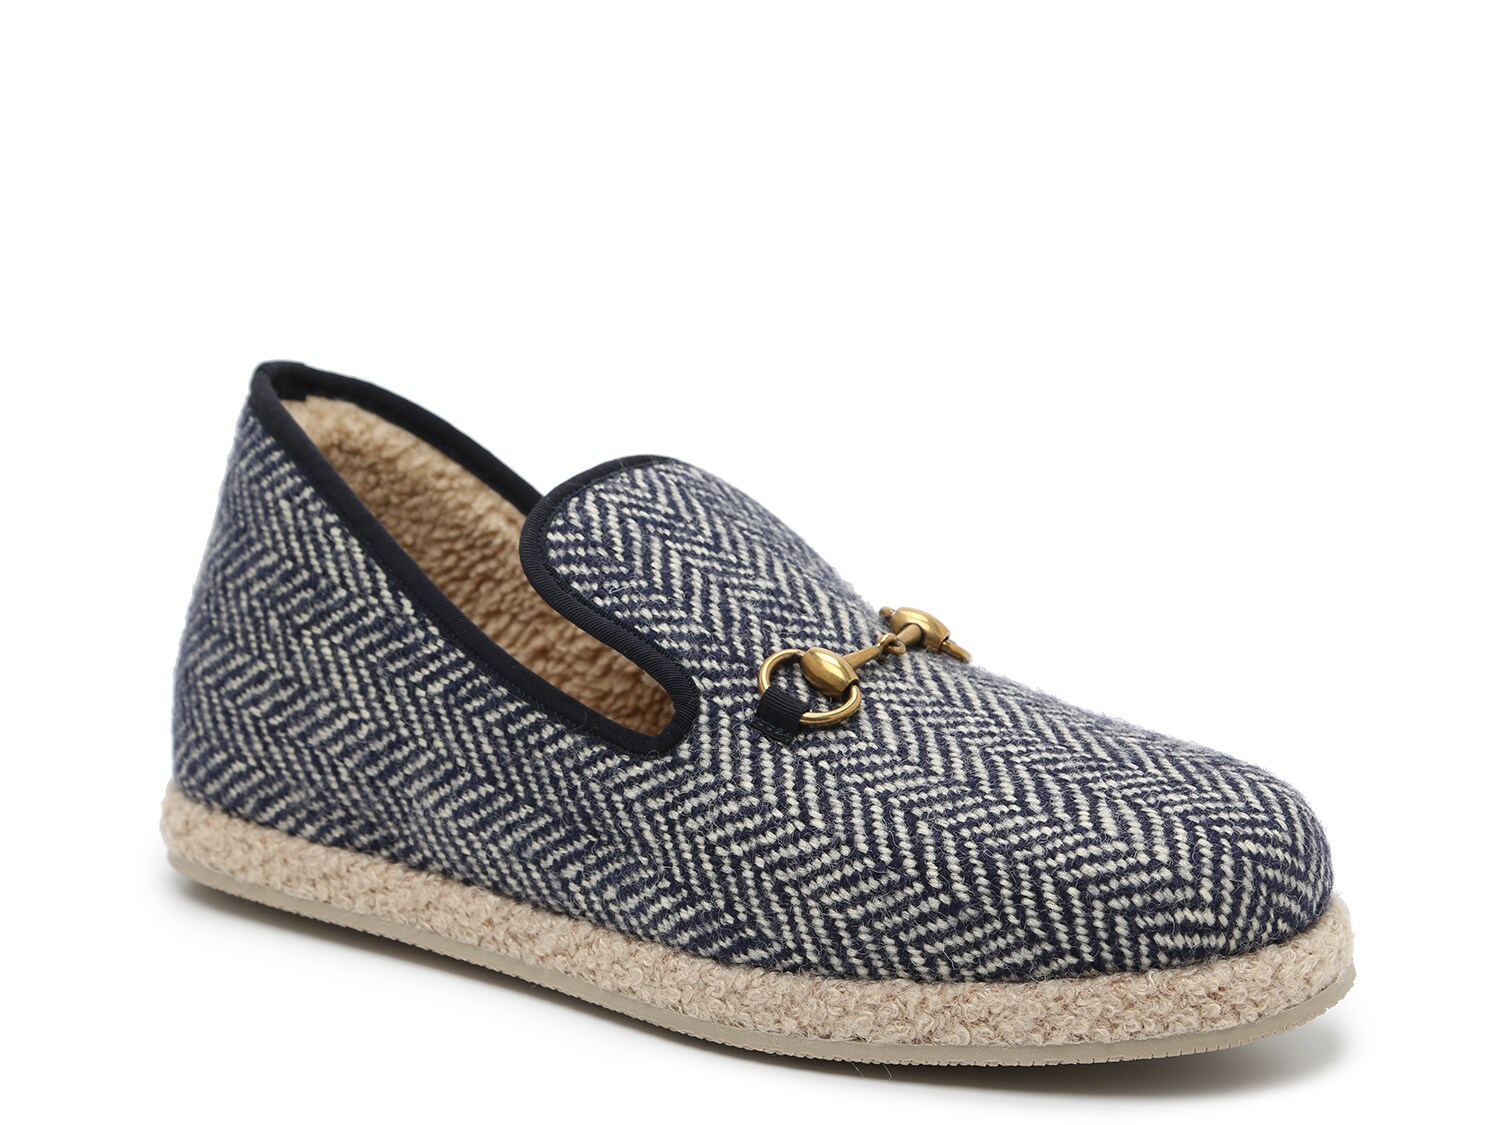 Loafers, Slip-Ons, and Moccasins | DSW